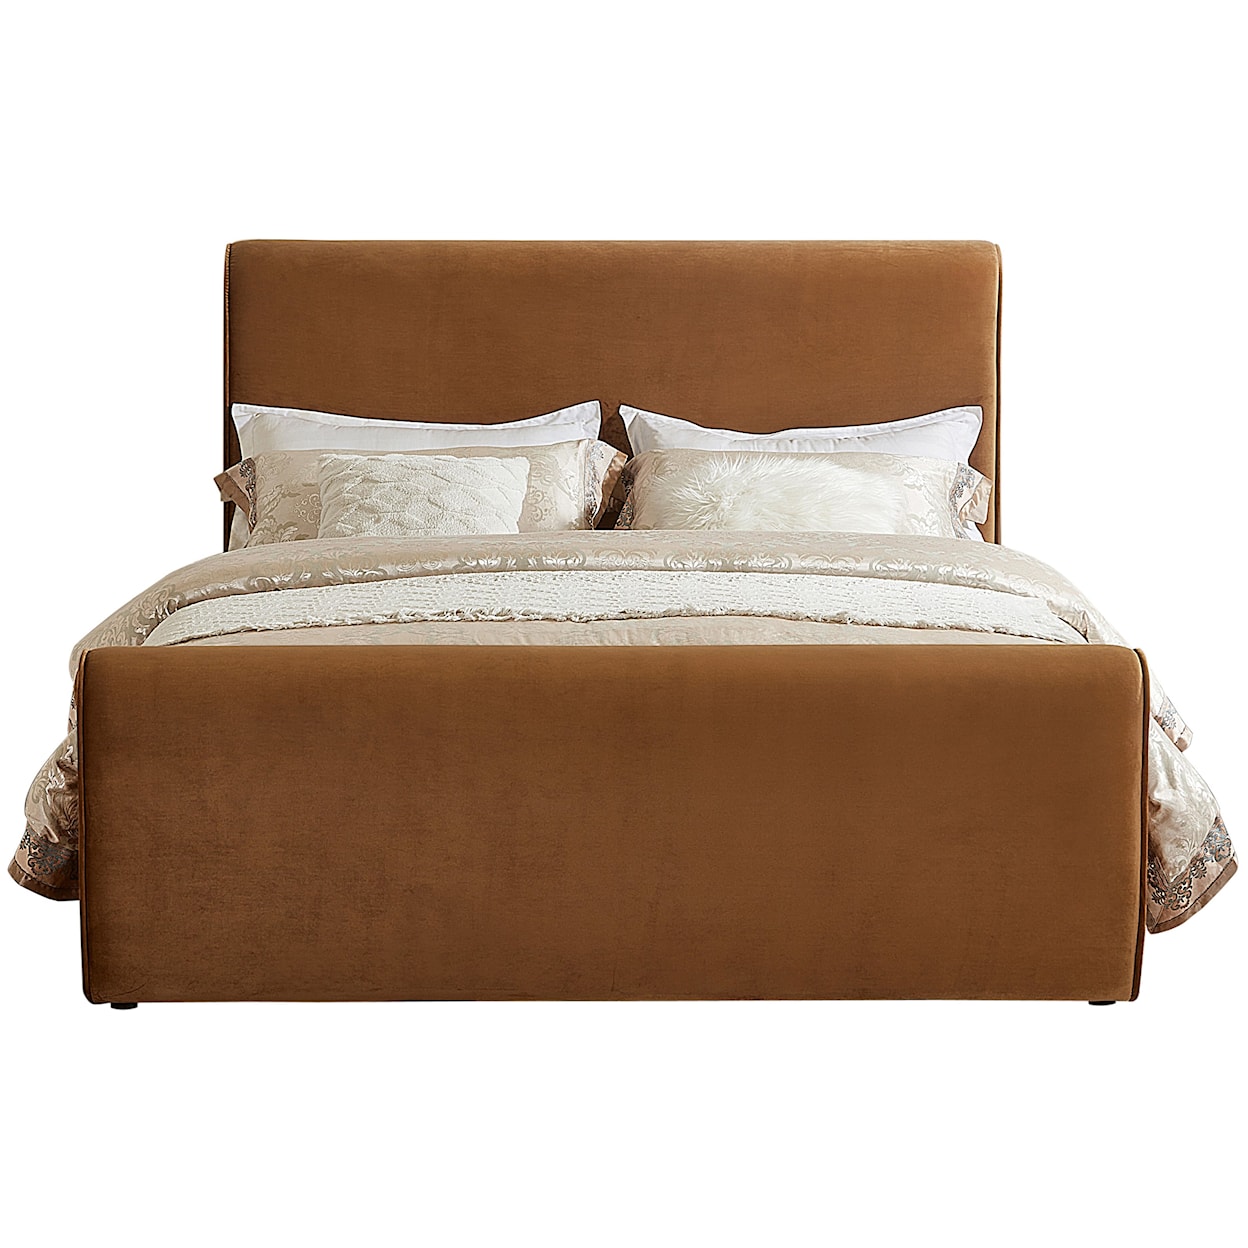 Meridian Furniture Sloan Queen Bed (3 Boxes)